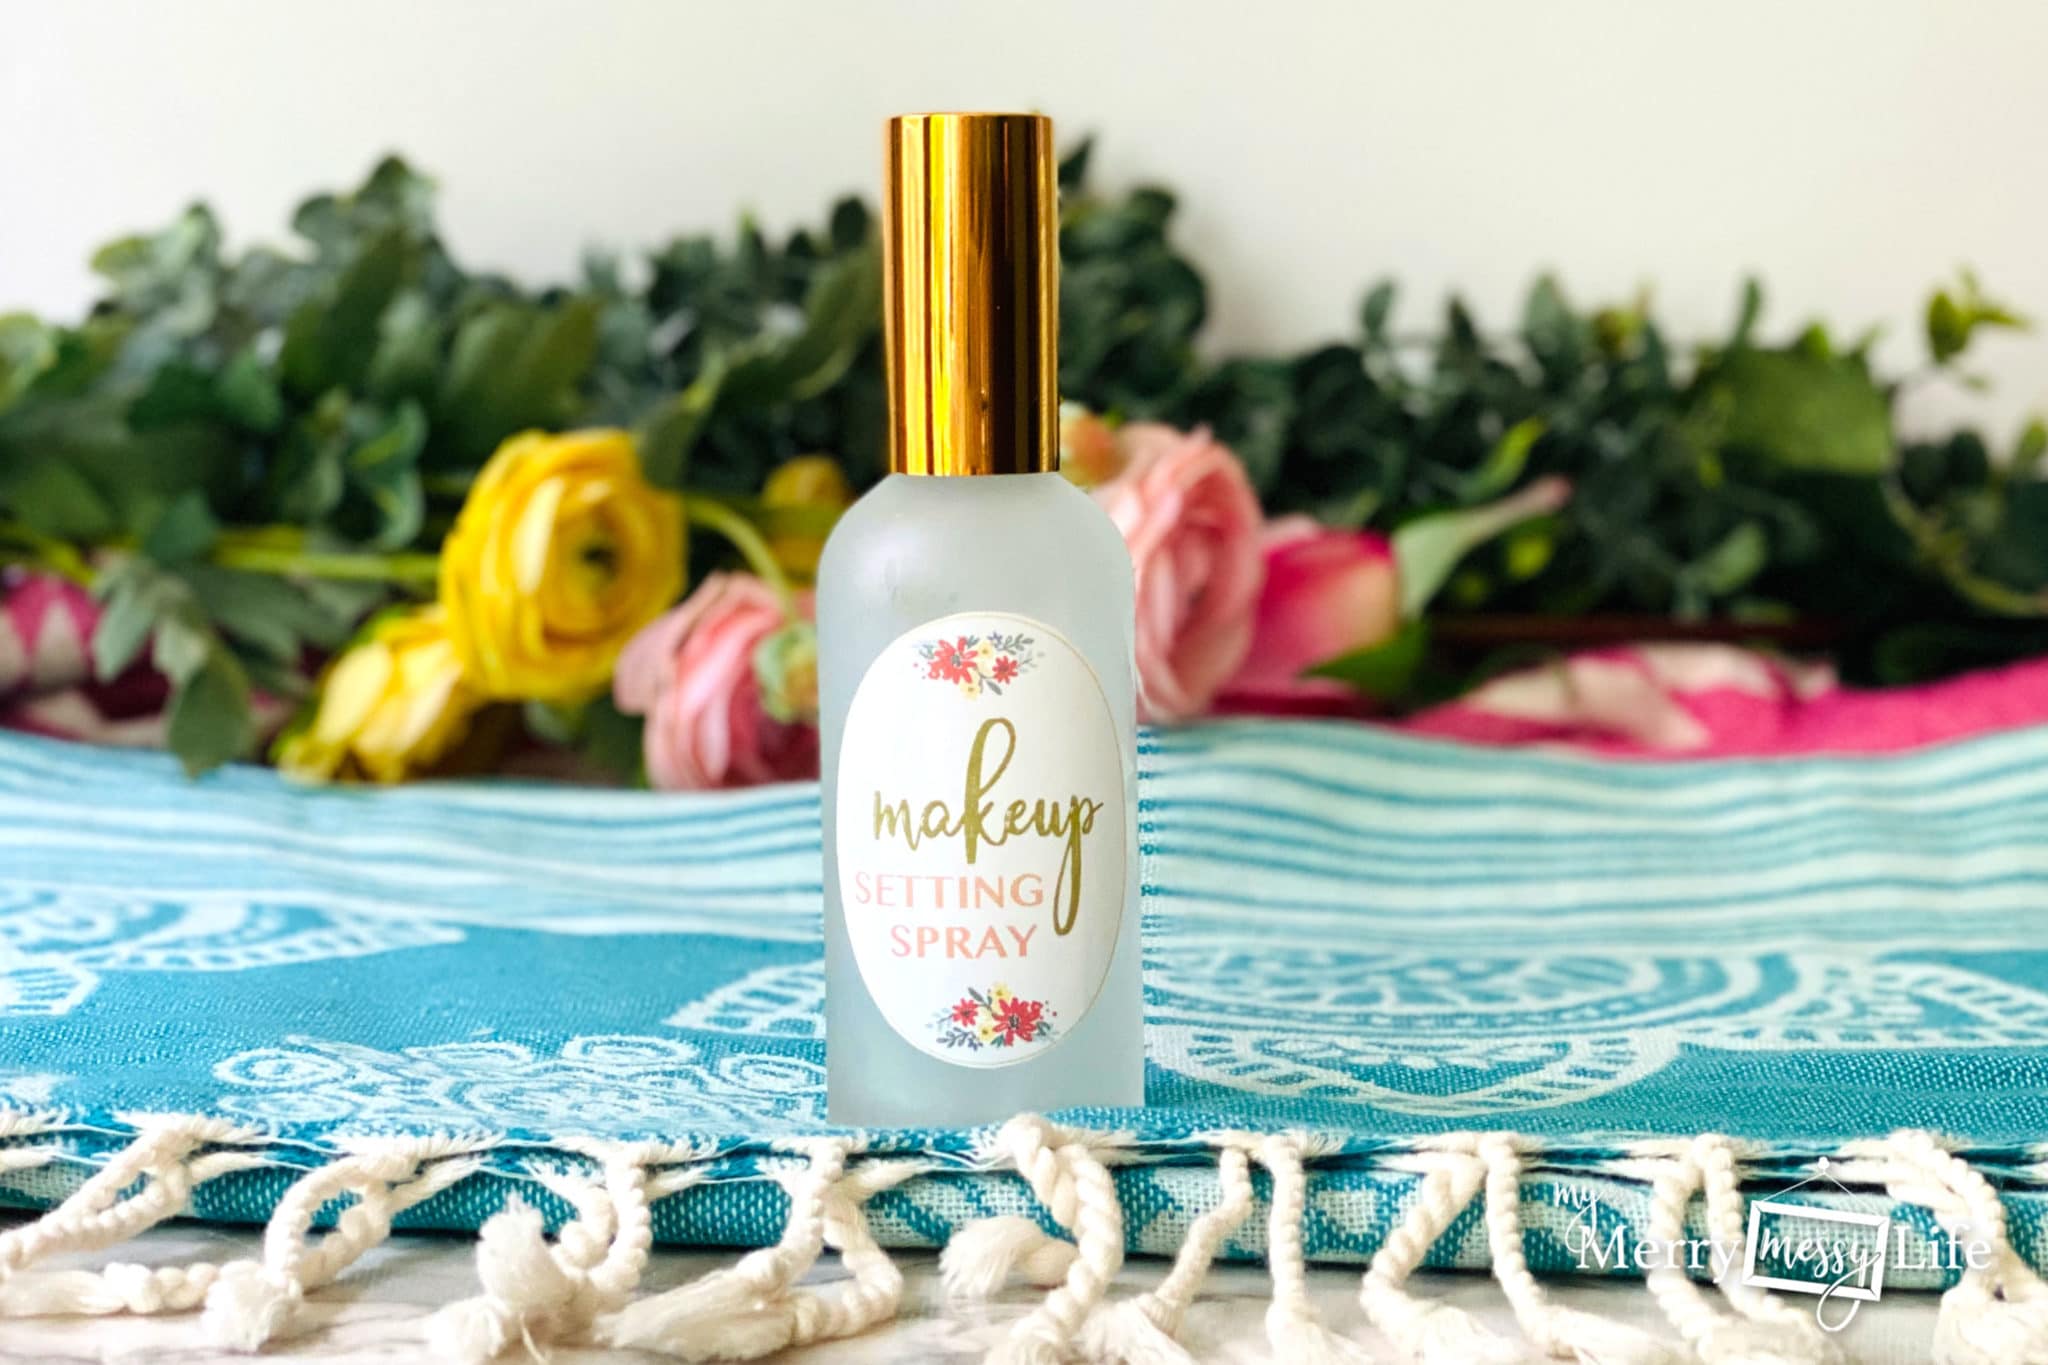 DIY Natural Make Up Setting Spray with Rose Water, Witch Hazel and Essential Oils to make your face feel fresh and dewy